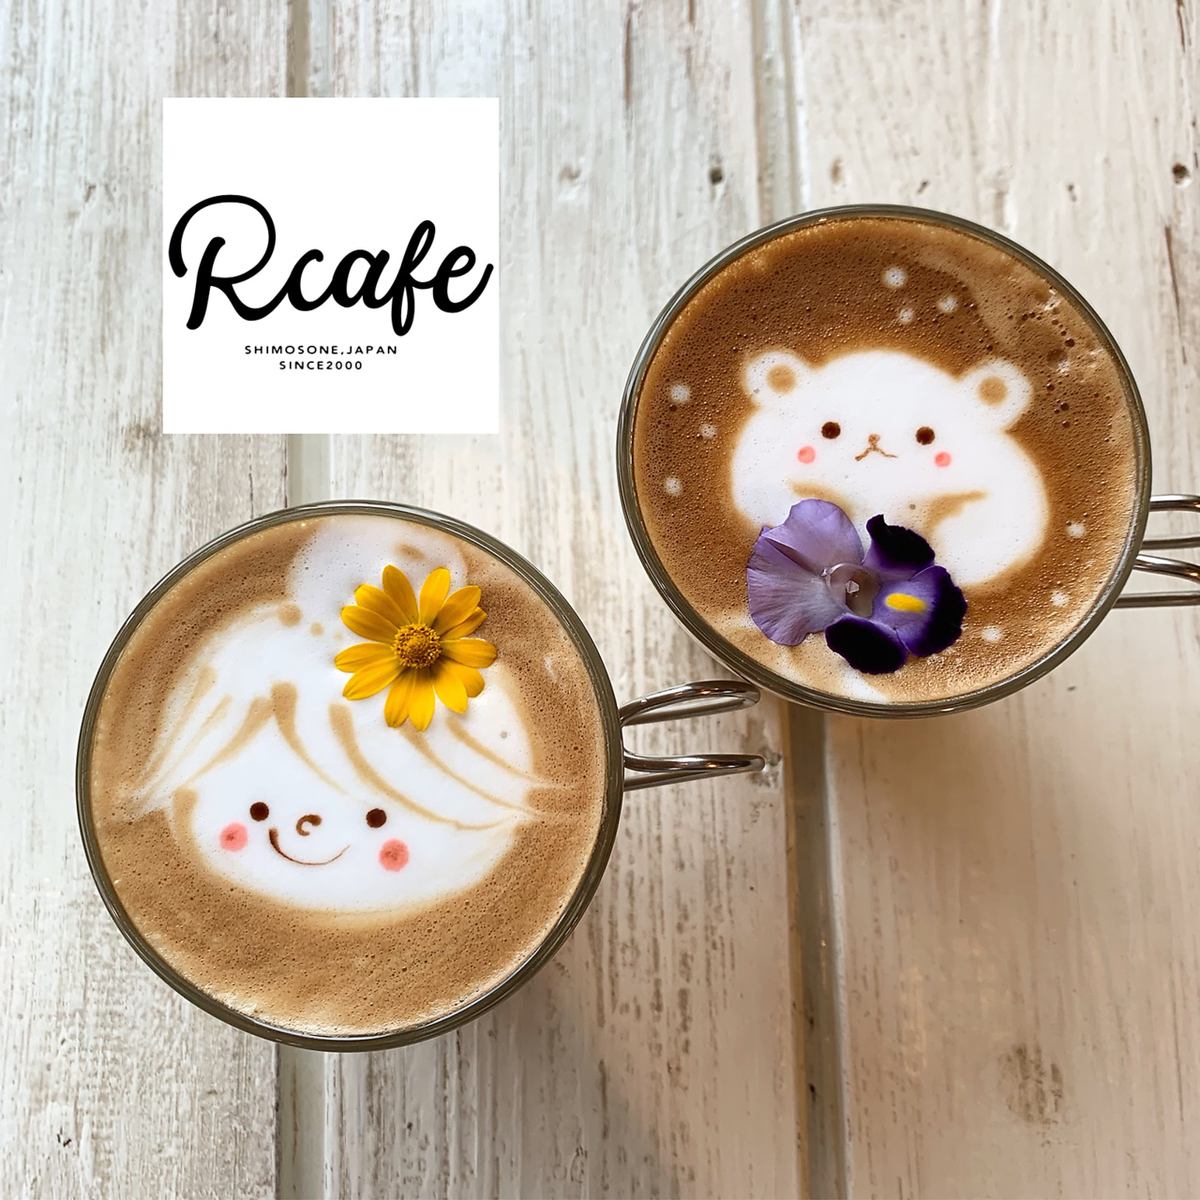 A cute menu with latte art and edible flowers